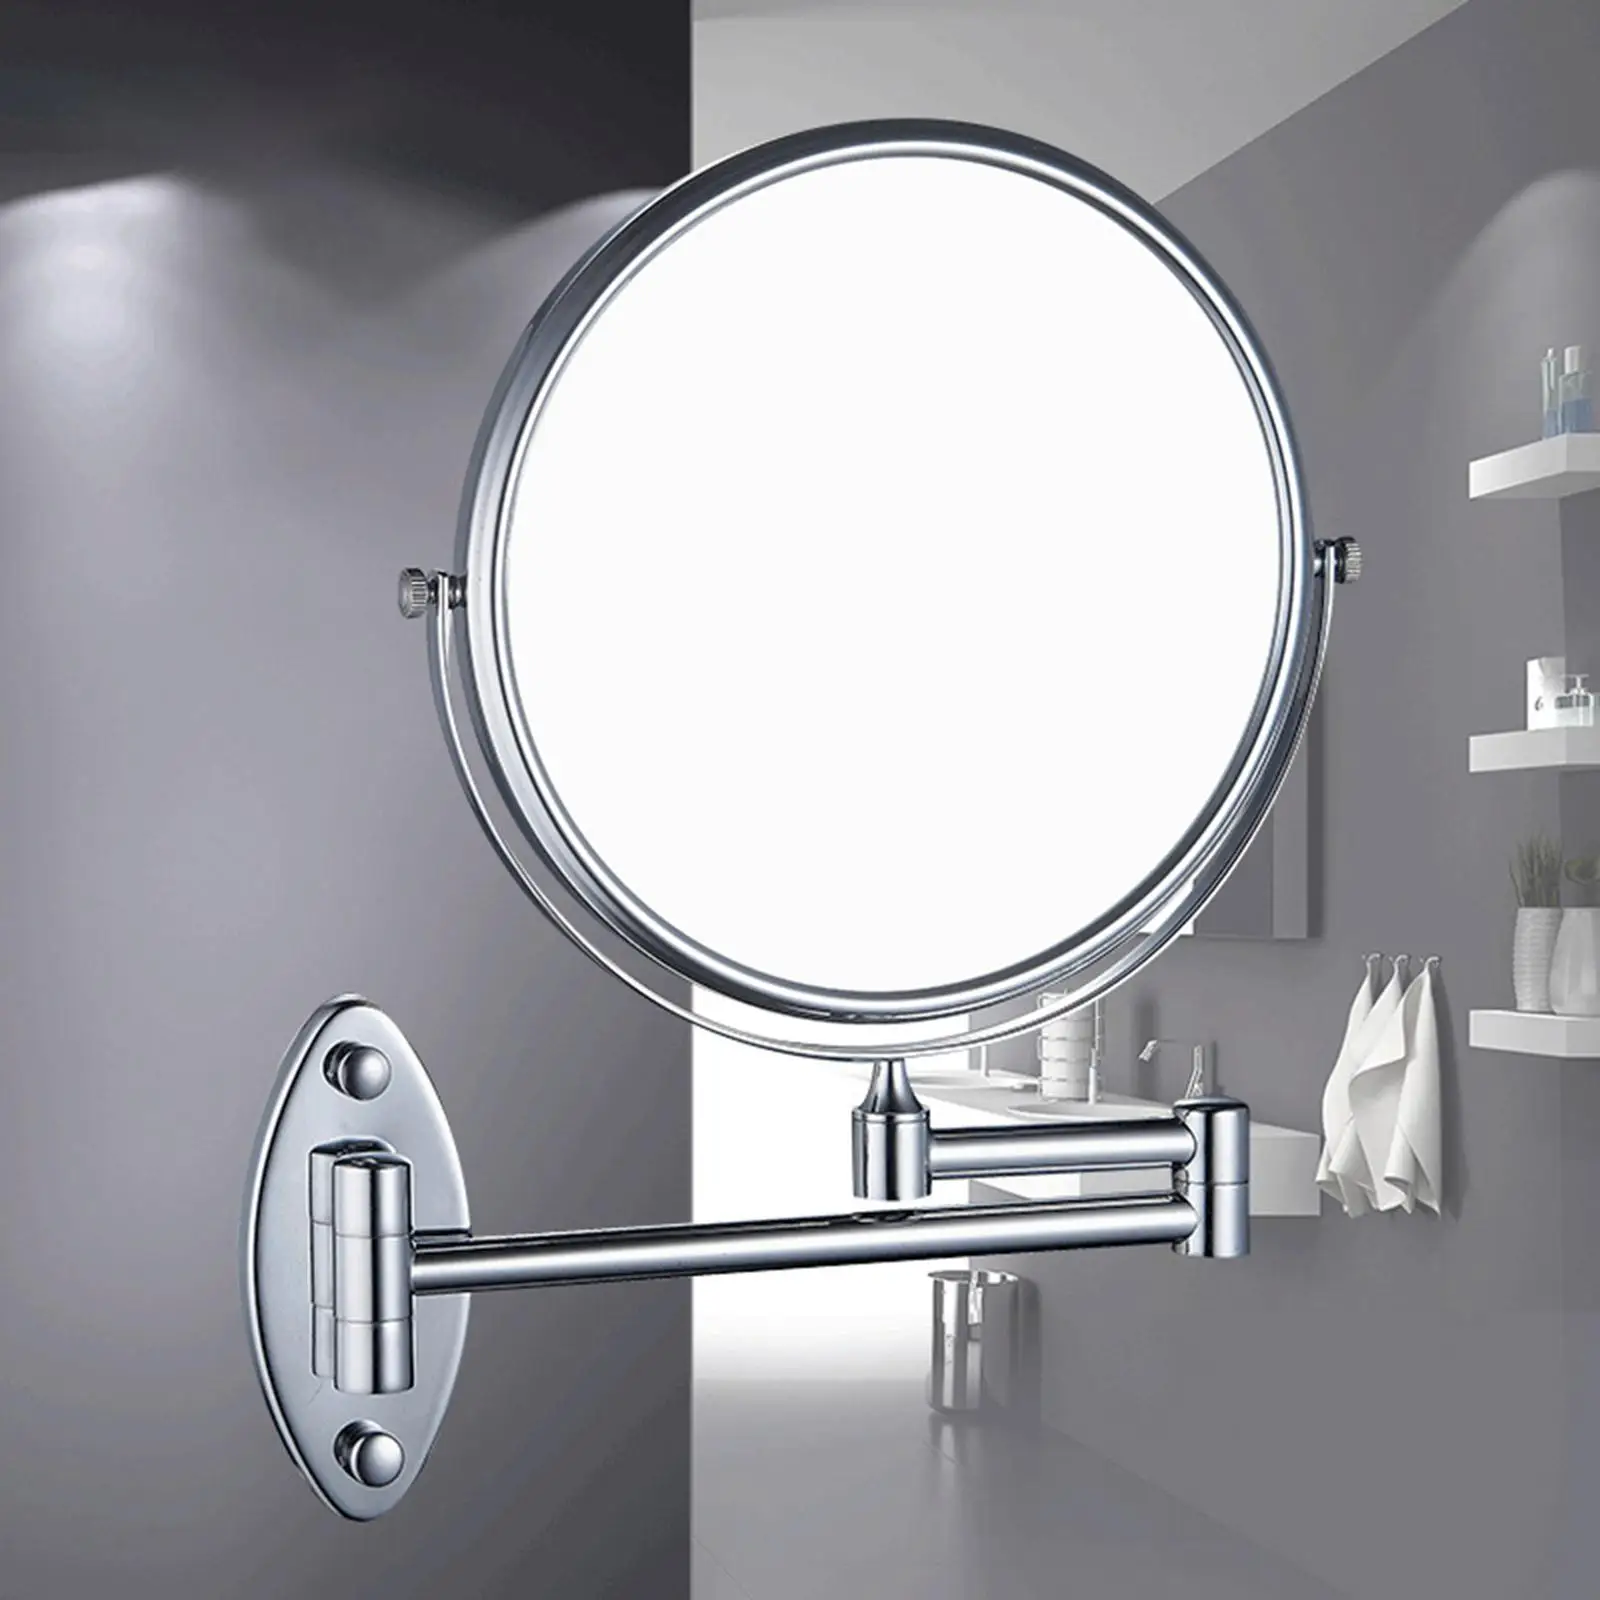 8 Inches Wall Mounted Makeup Makeup  Polished Chrome Finished 3x Magnification Shaving Mirrors for Bathroom Hotel